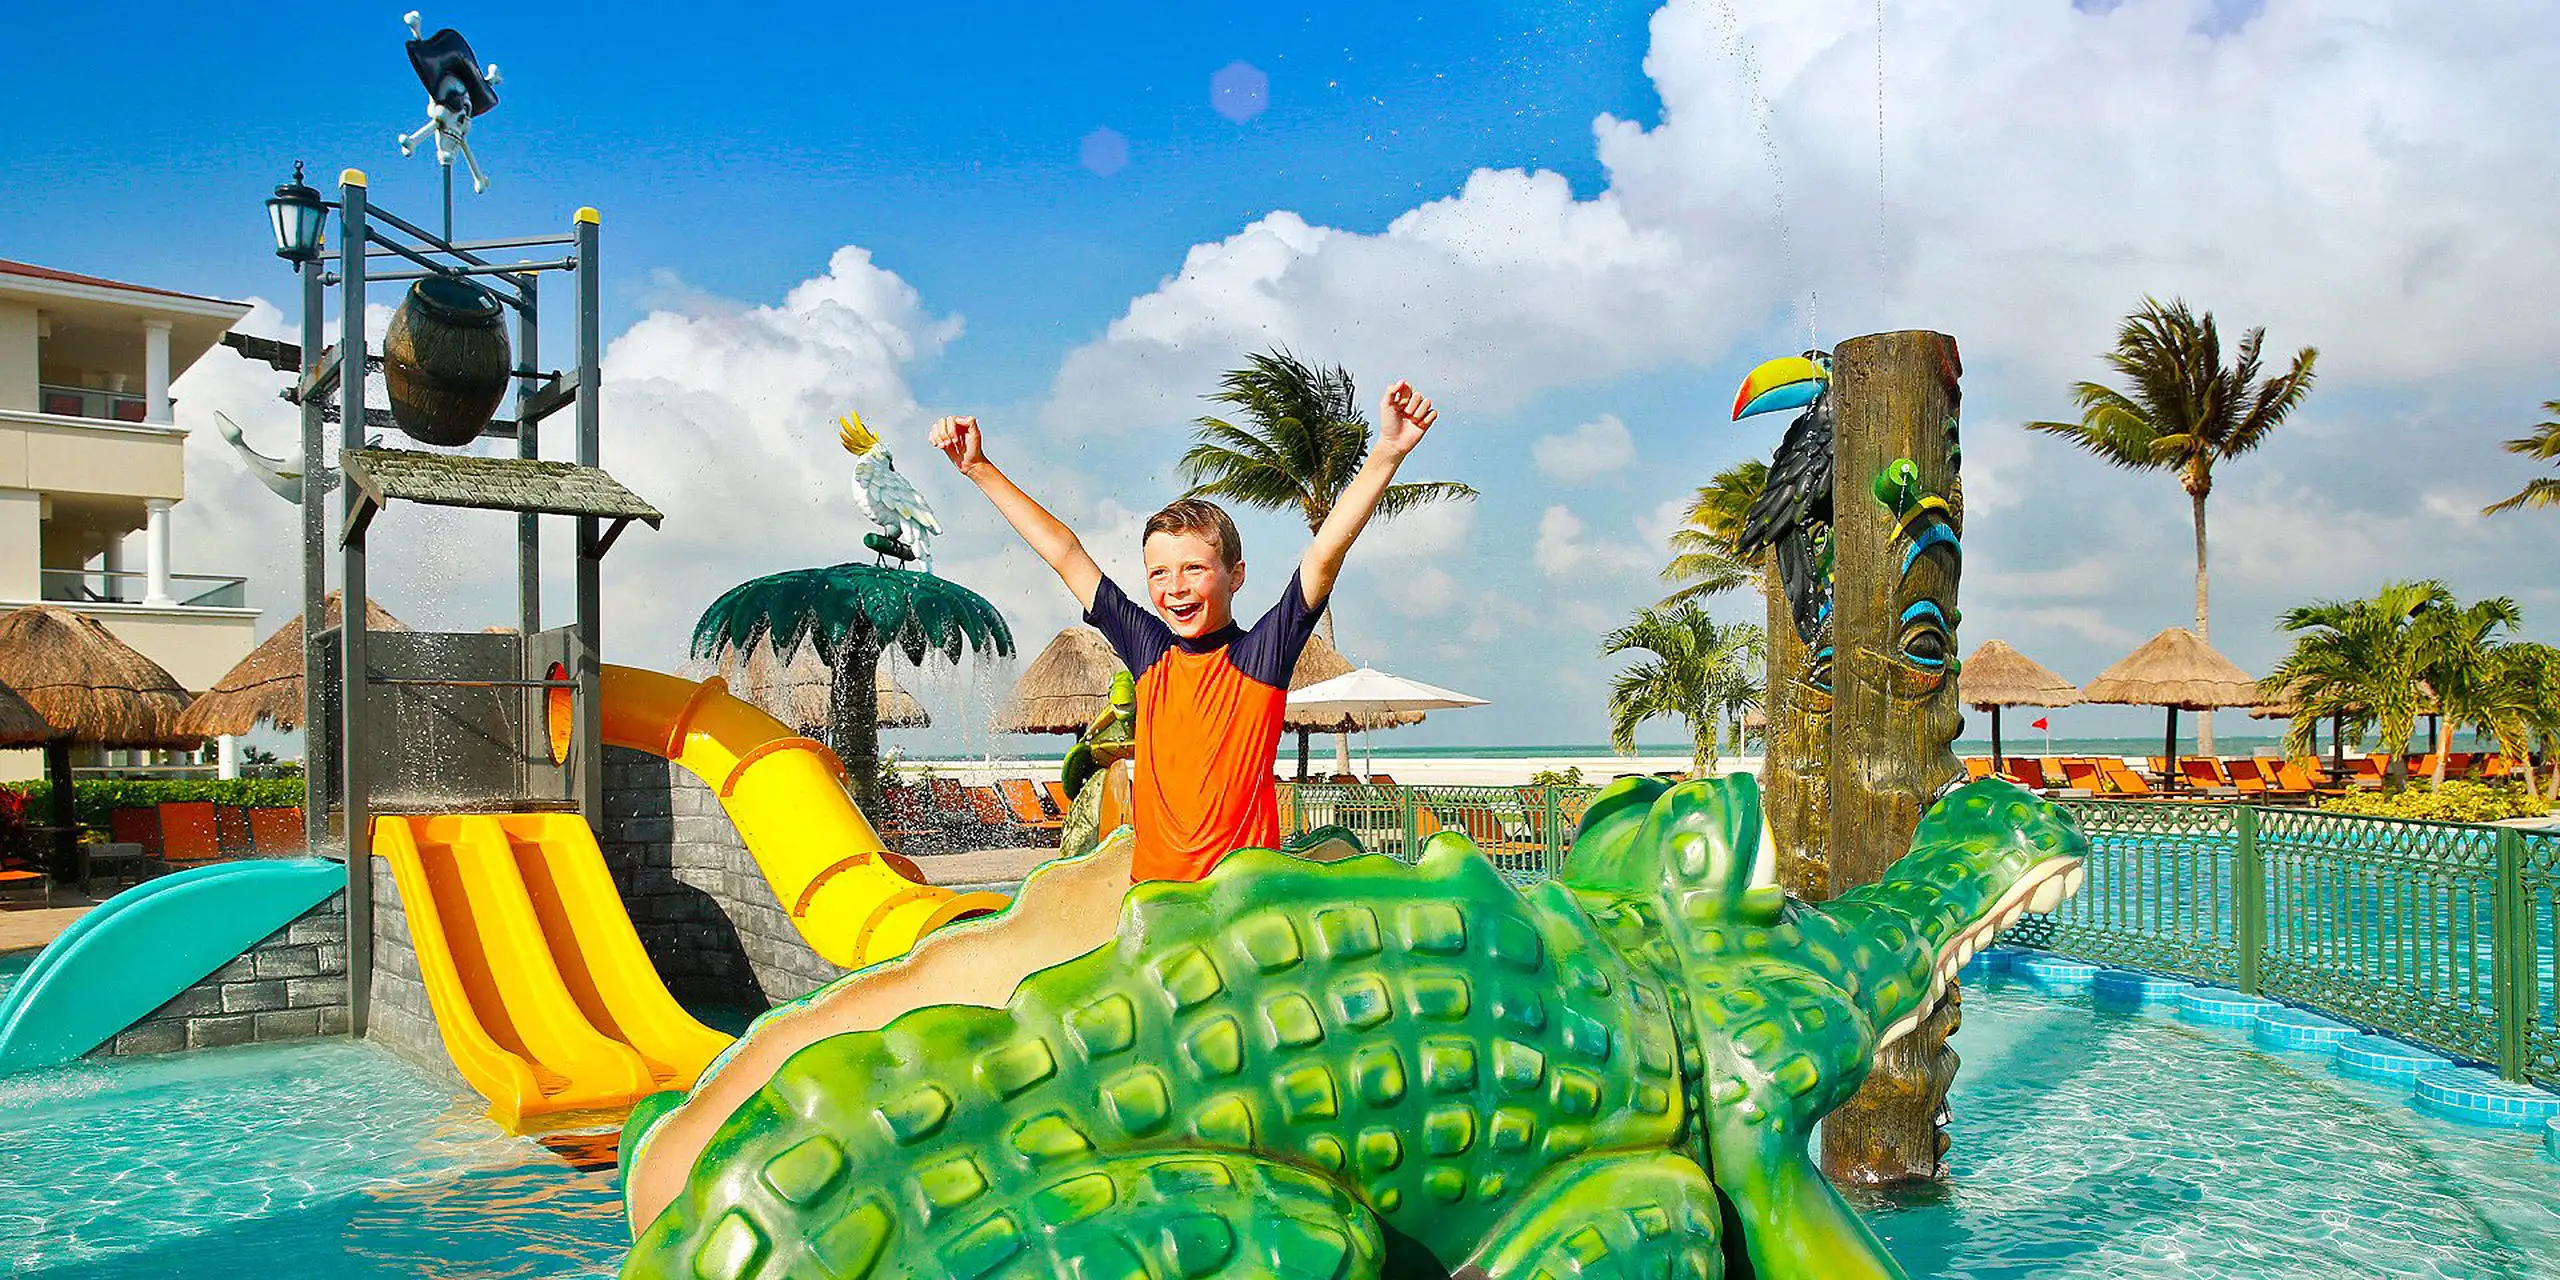 Moon Palace Cancun Water Park; Courtesy of Moon Palace Cancun